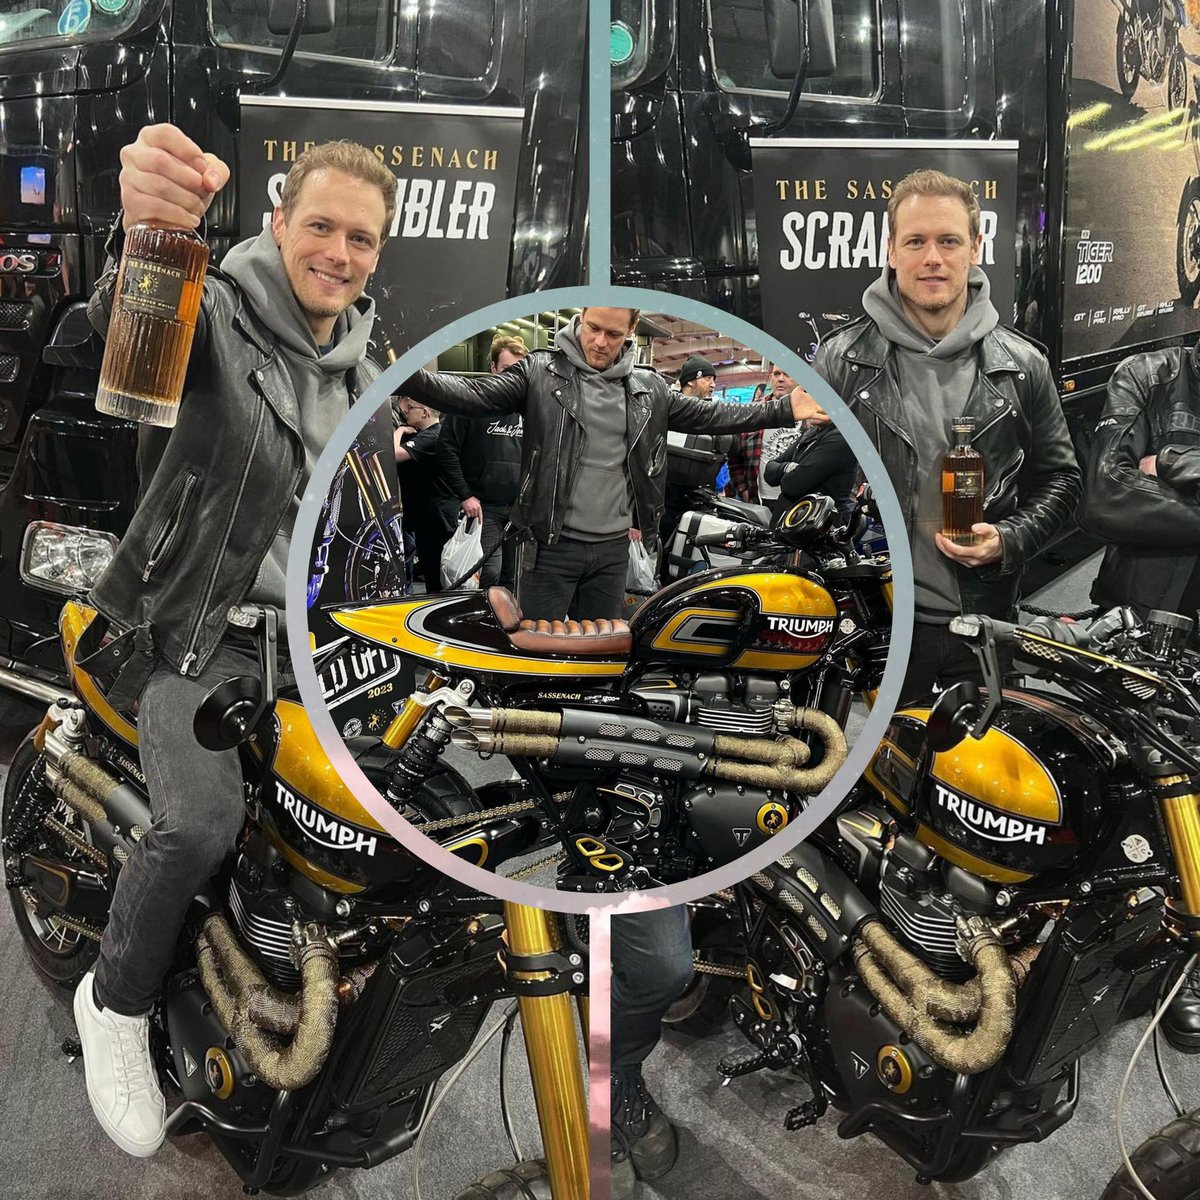 Waouh !!!! Stunning your bike Sam👏😍 @SamHeughan That's an absolute beauty 🧡💛 So happy for you. I wish you a lot of fun with YOUR Sassenach bike !!!🥃❤️‍🔥💯🏍 Drive safe😉 @OfficialTriumph